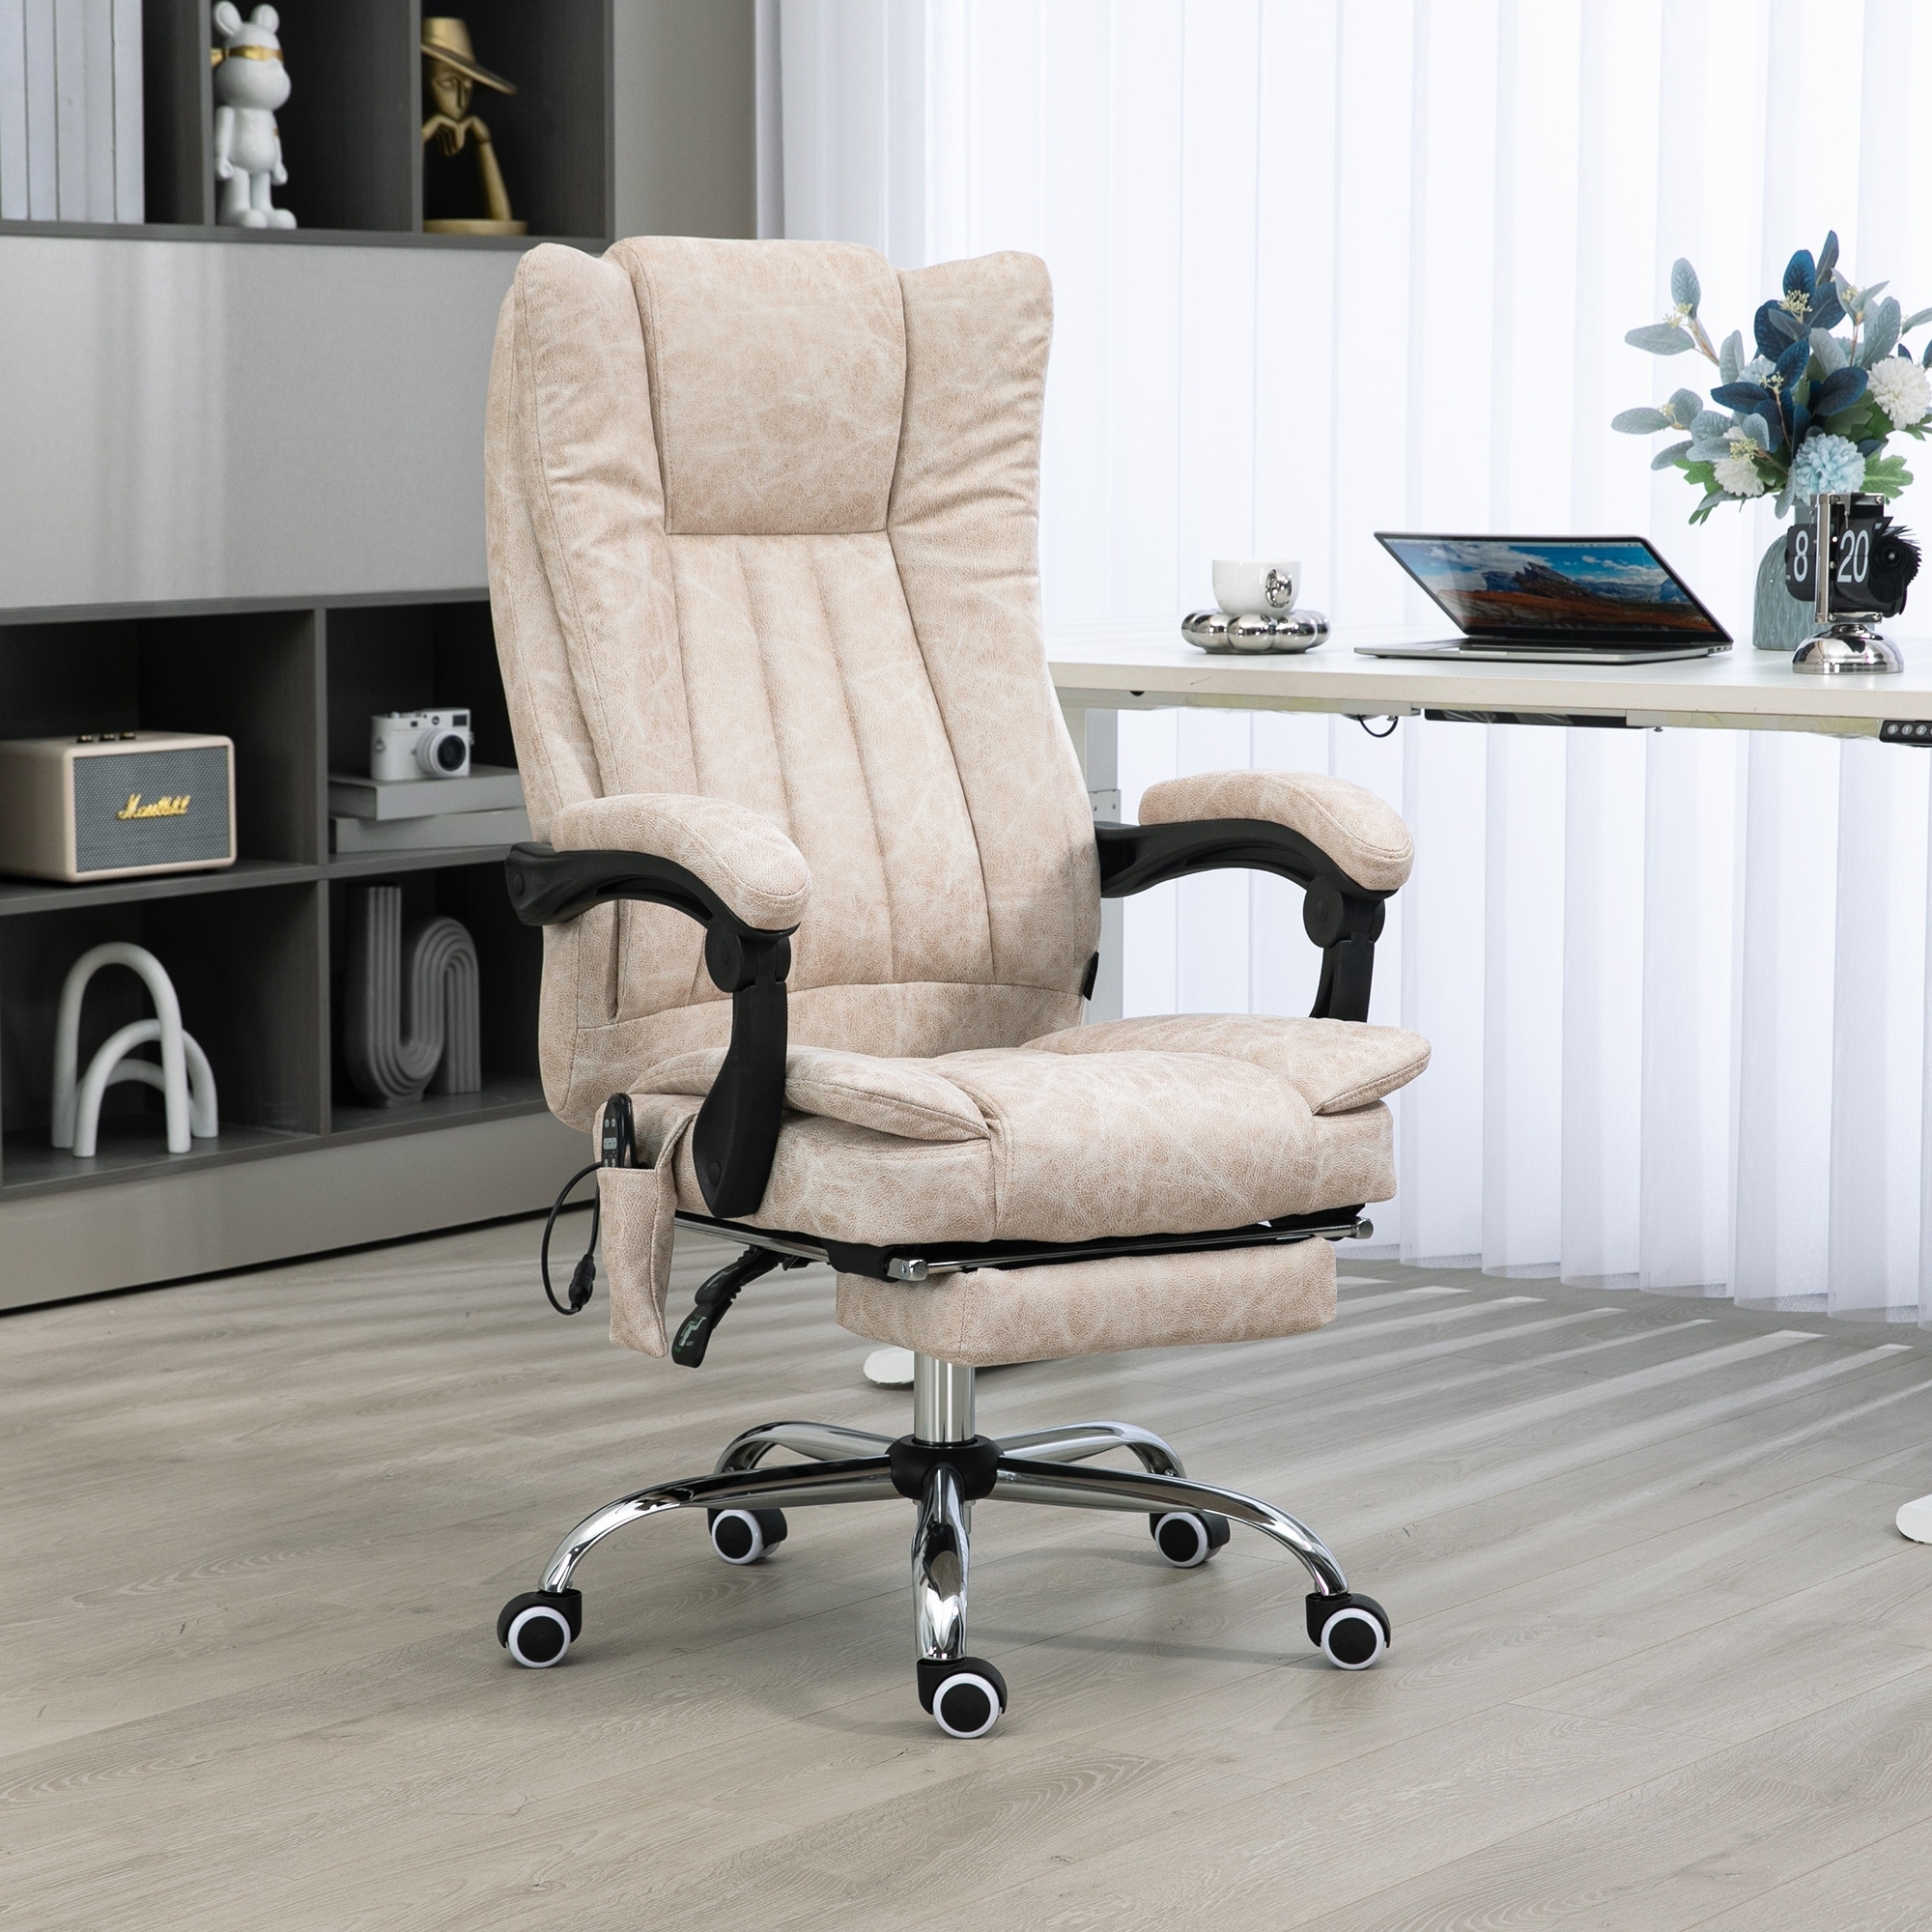 Vinsetto High Back Massage Office Desk Chair with 6-Point